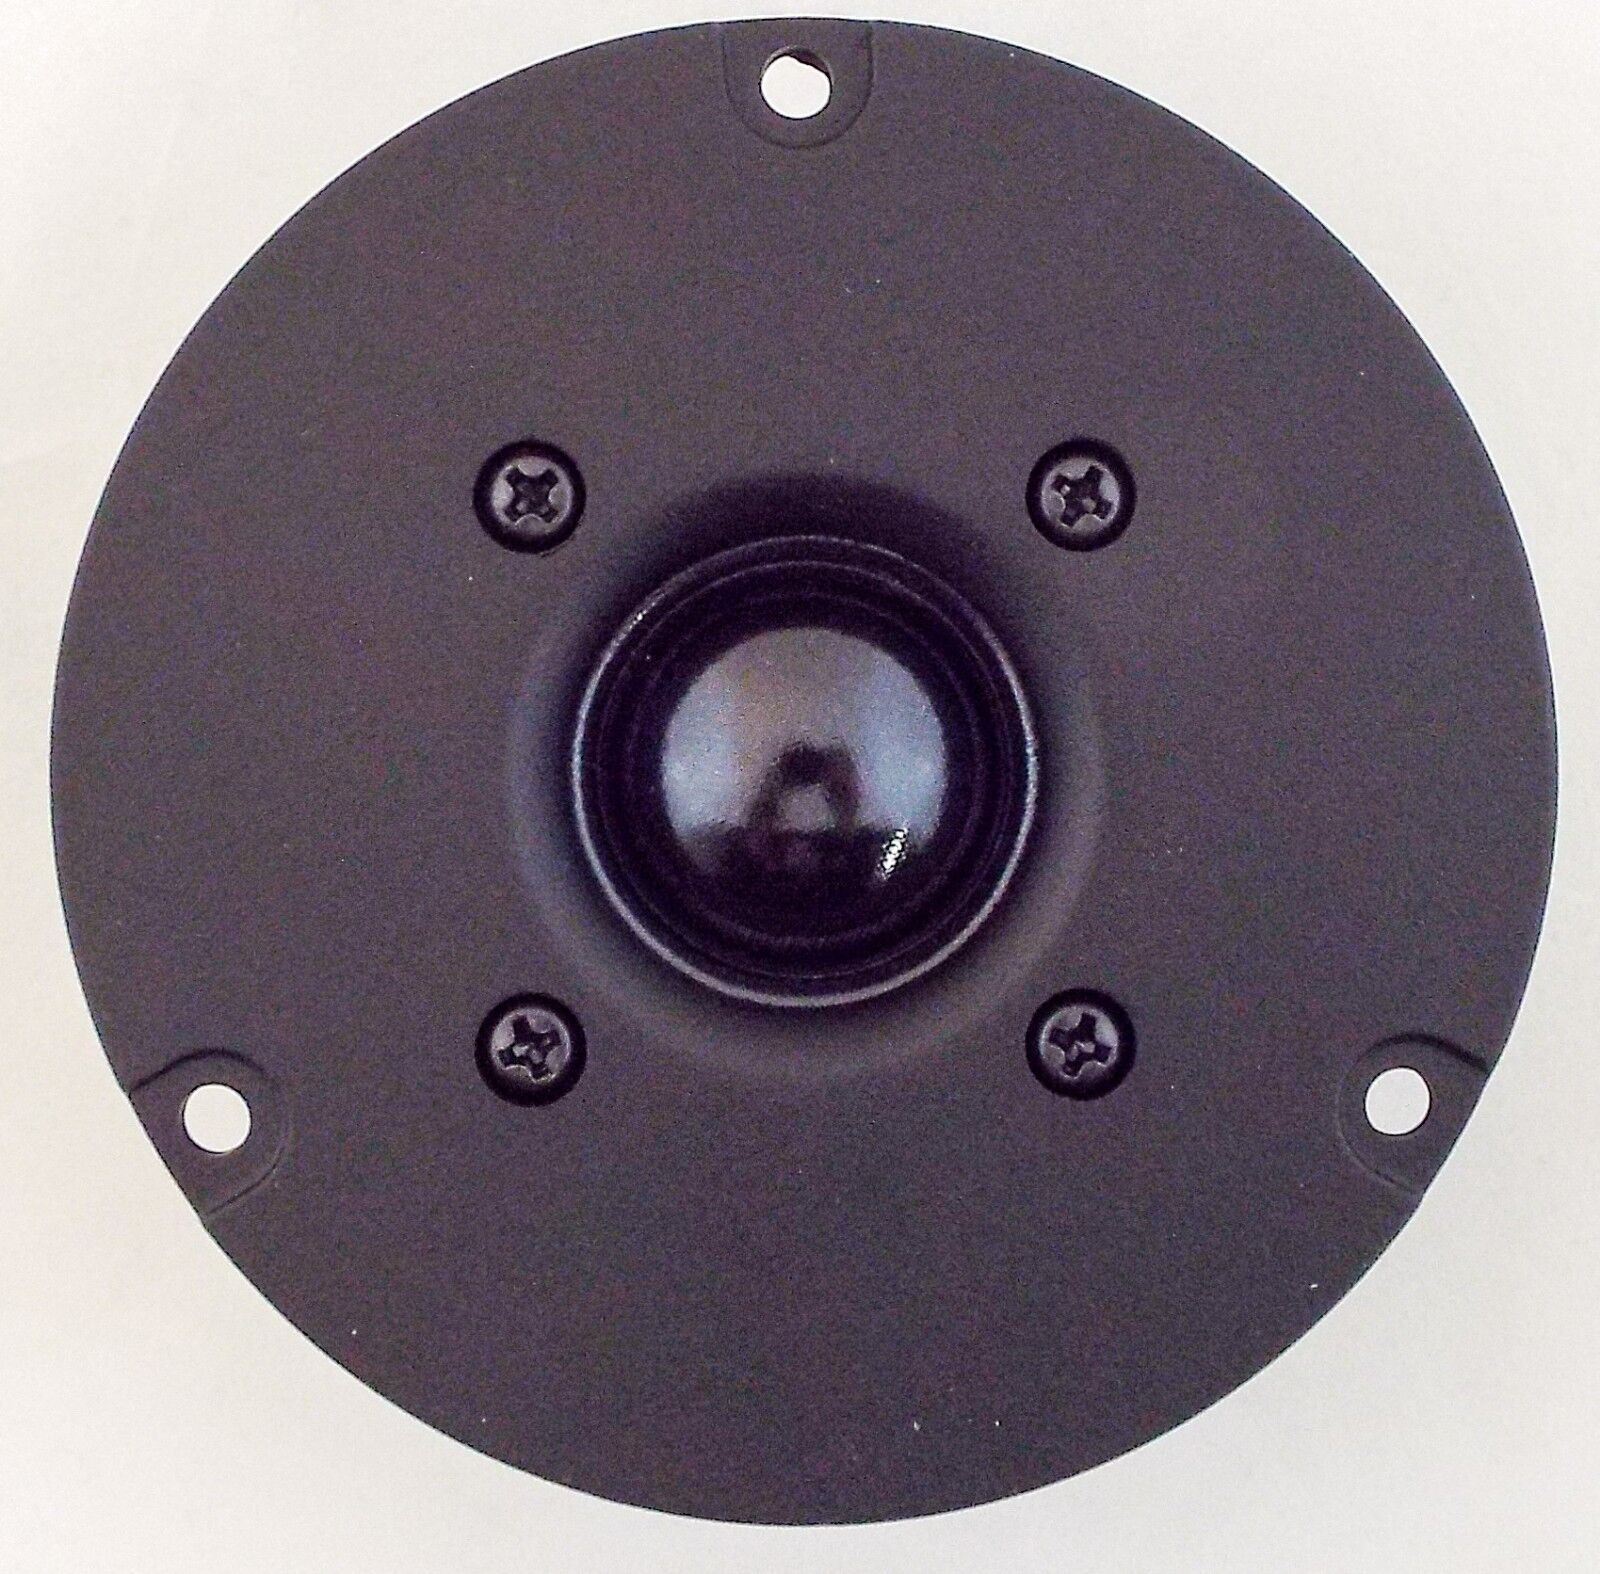 Tweeter for Infinity SM-152 SM-155 902-4270 902-2638 902-6688 Polycell MT-4003-8